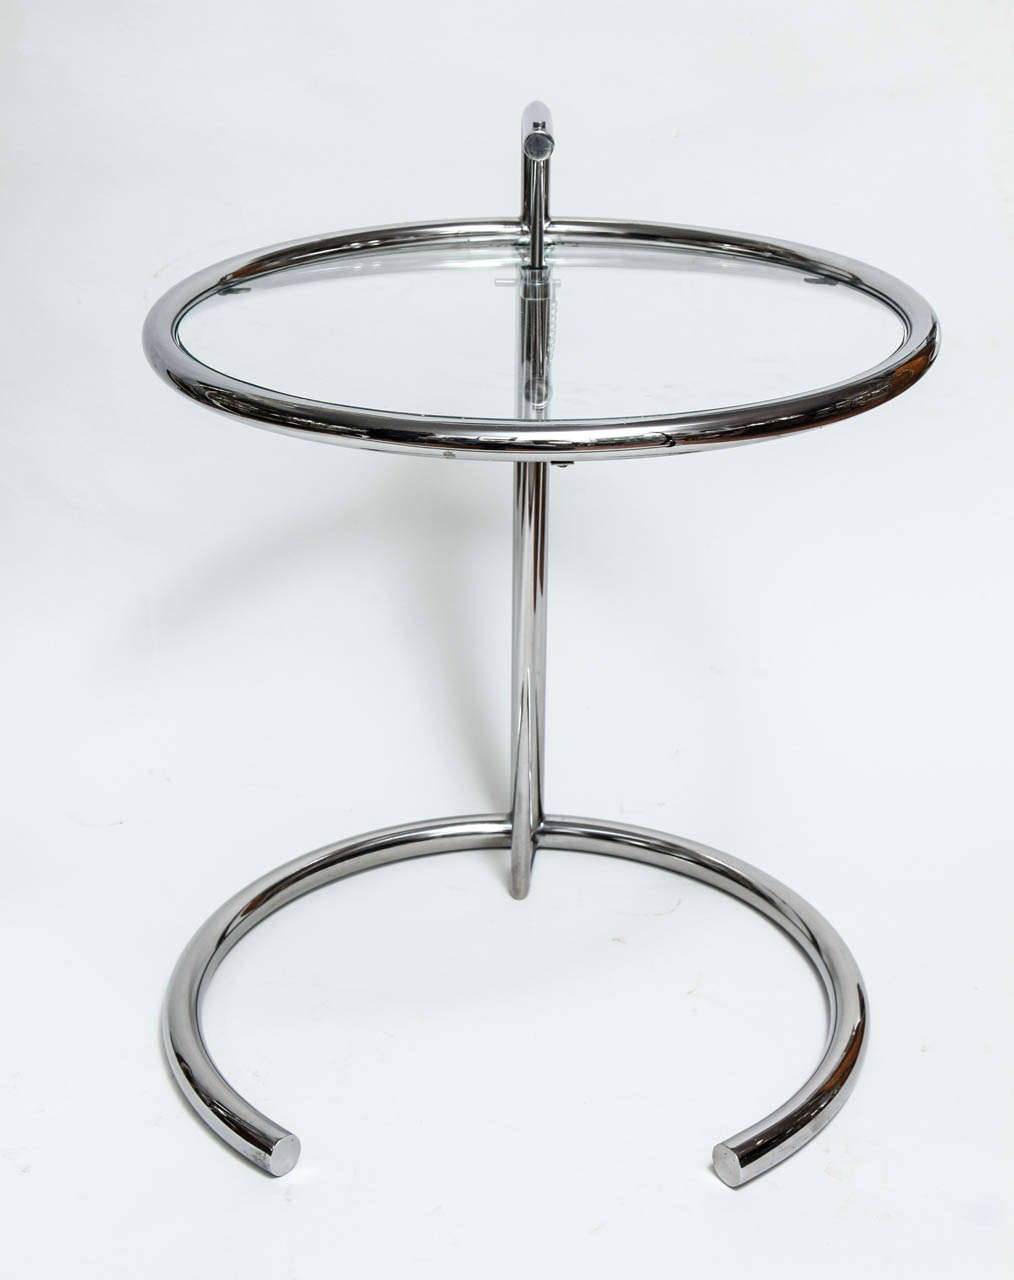 Pair of classic circular adjustable tables designed by Eileen Grey. From 21